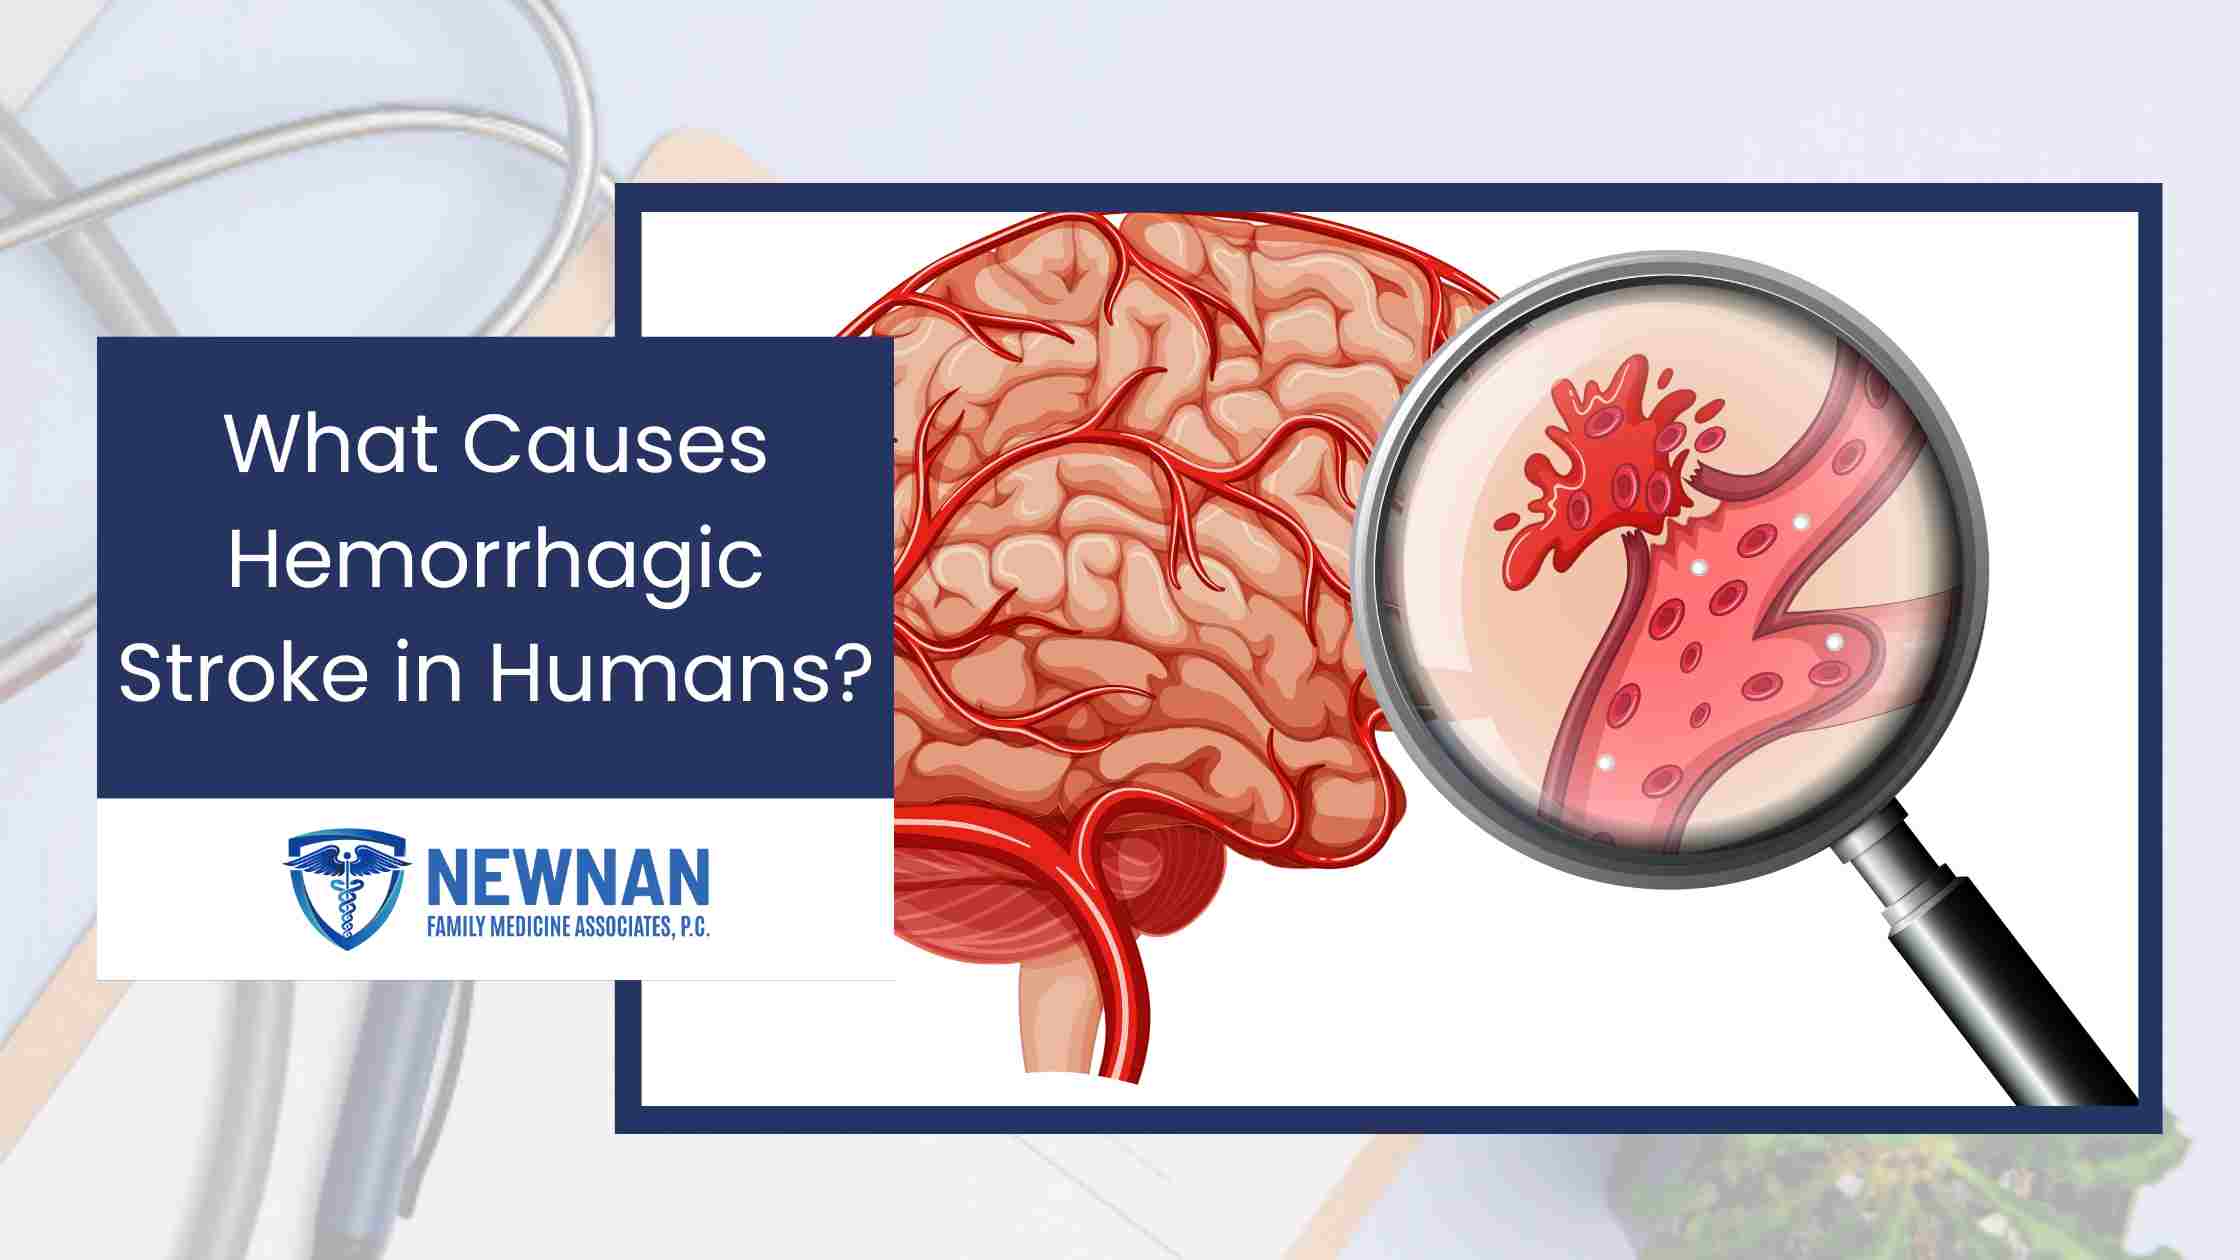 What Causes Hemorrhagic Stroke in Humans?